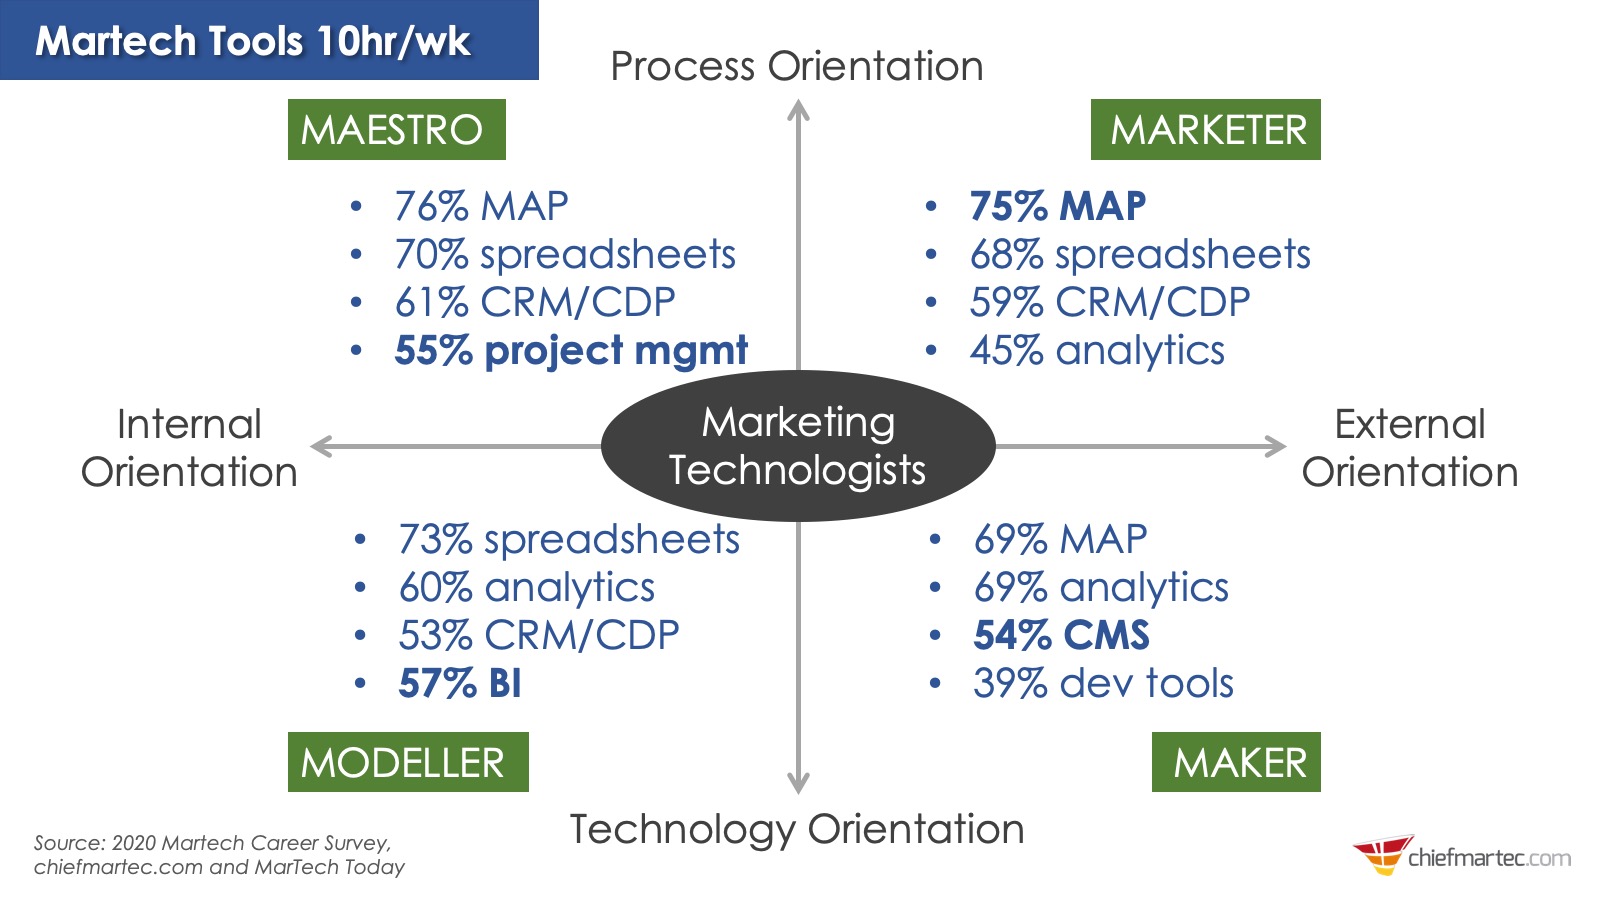 Marketing Tools Different Martech Roles Spend 10+ Hours Per Week Using